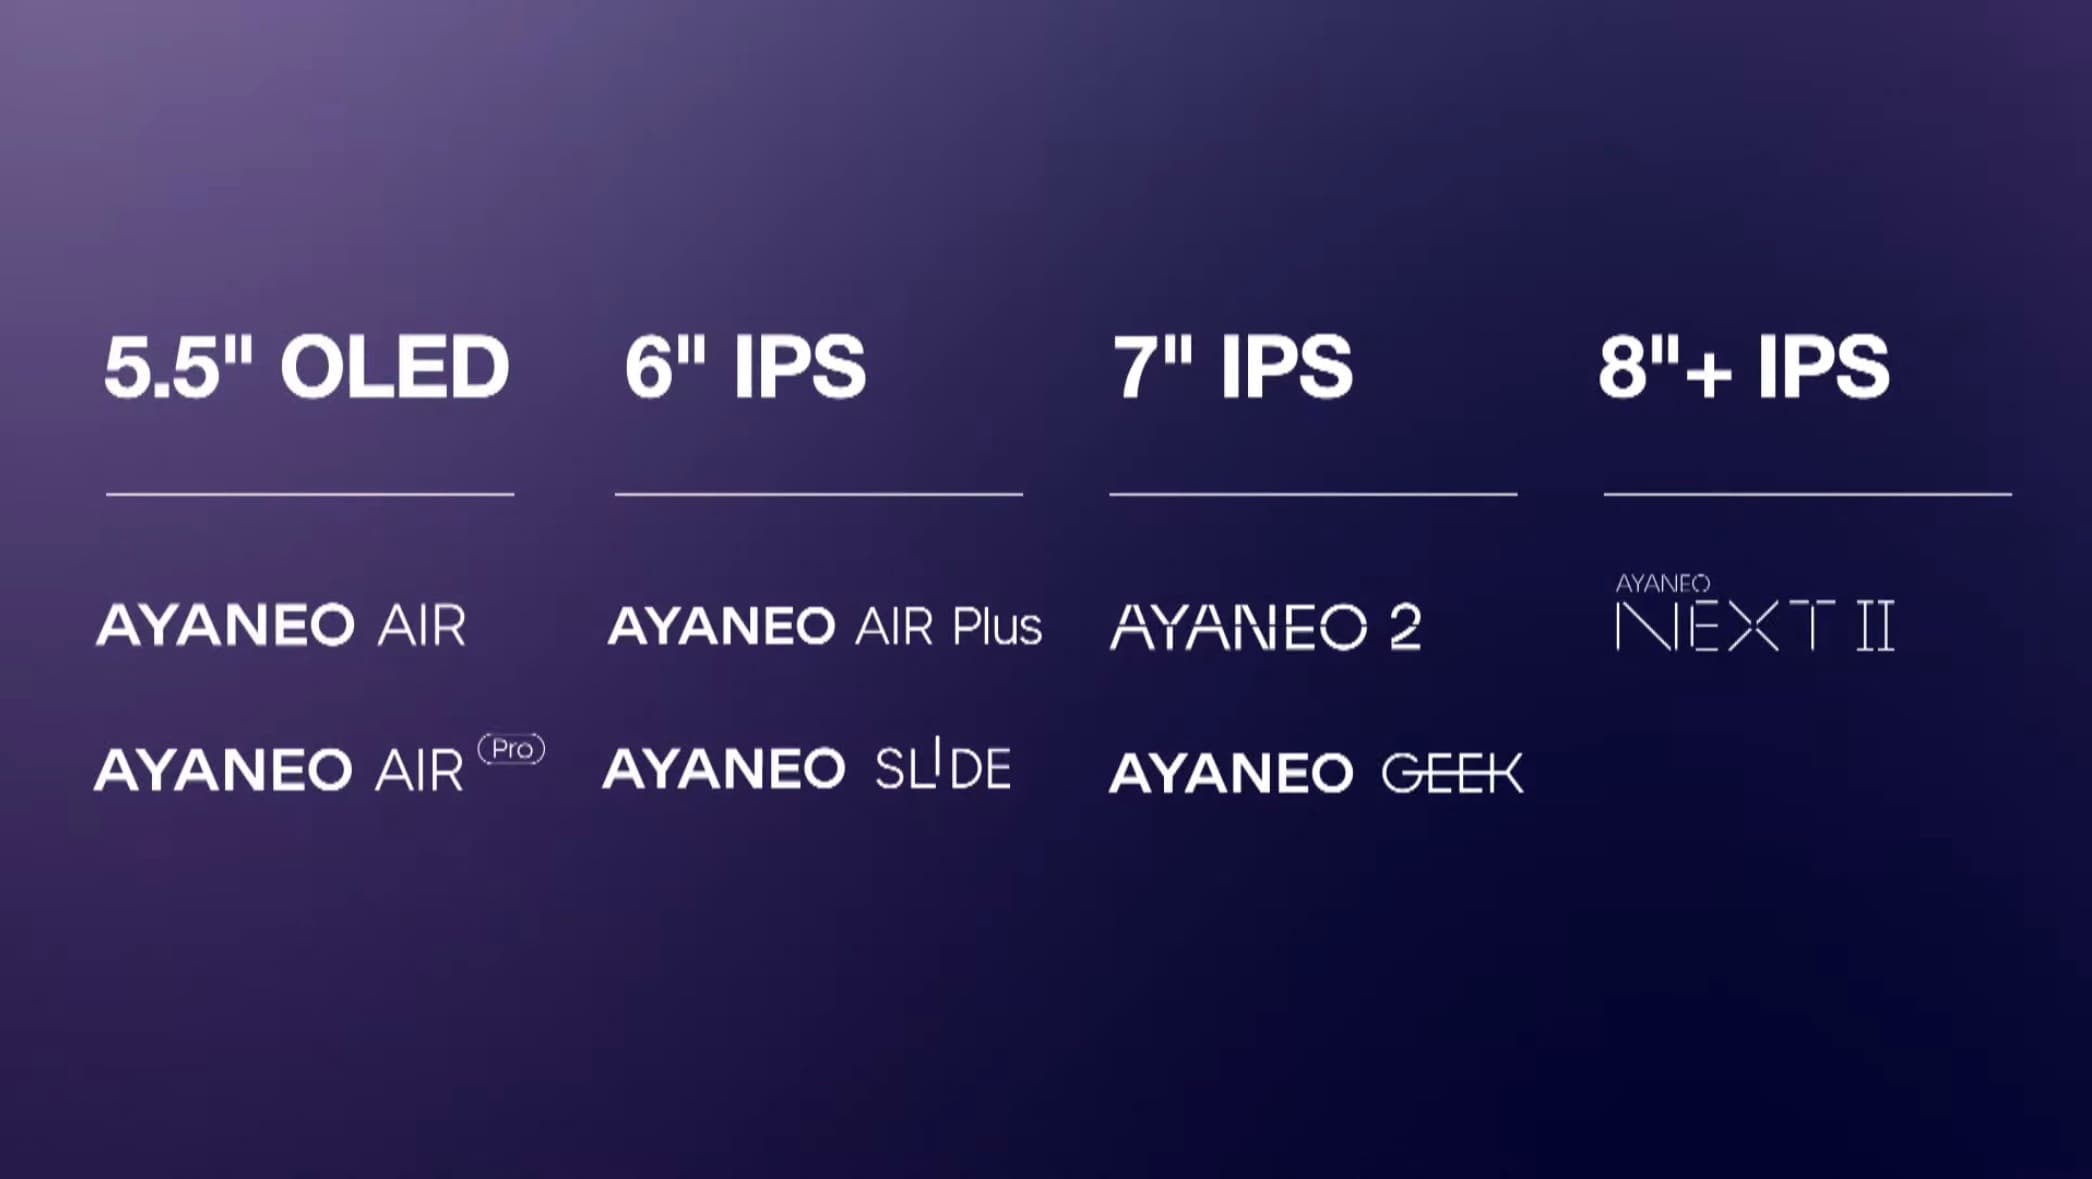 The AYANEO device line-up